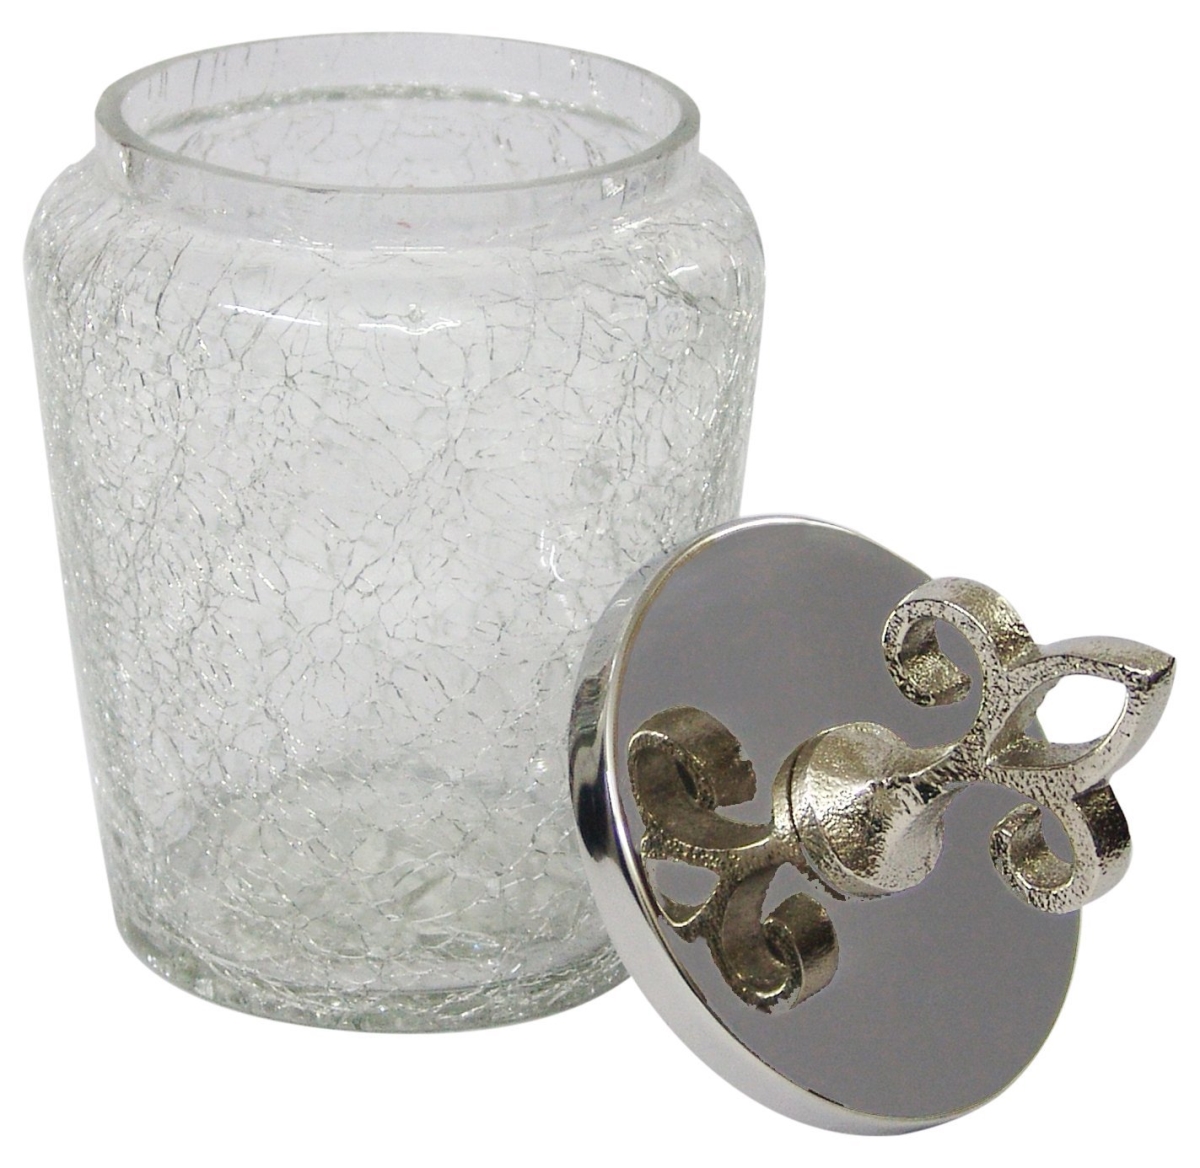 Gc-52l Crackle Glass Canister With Stainless Steel Lid - Large